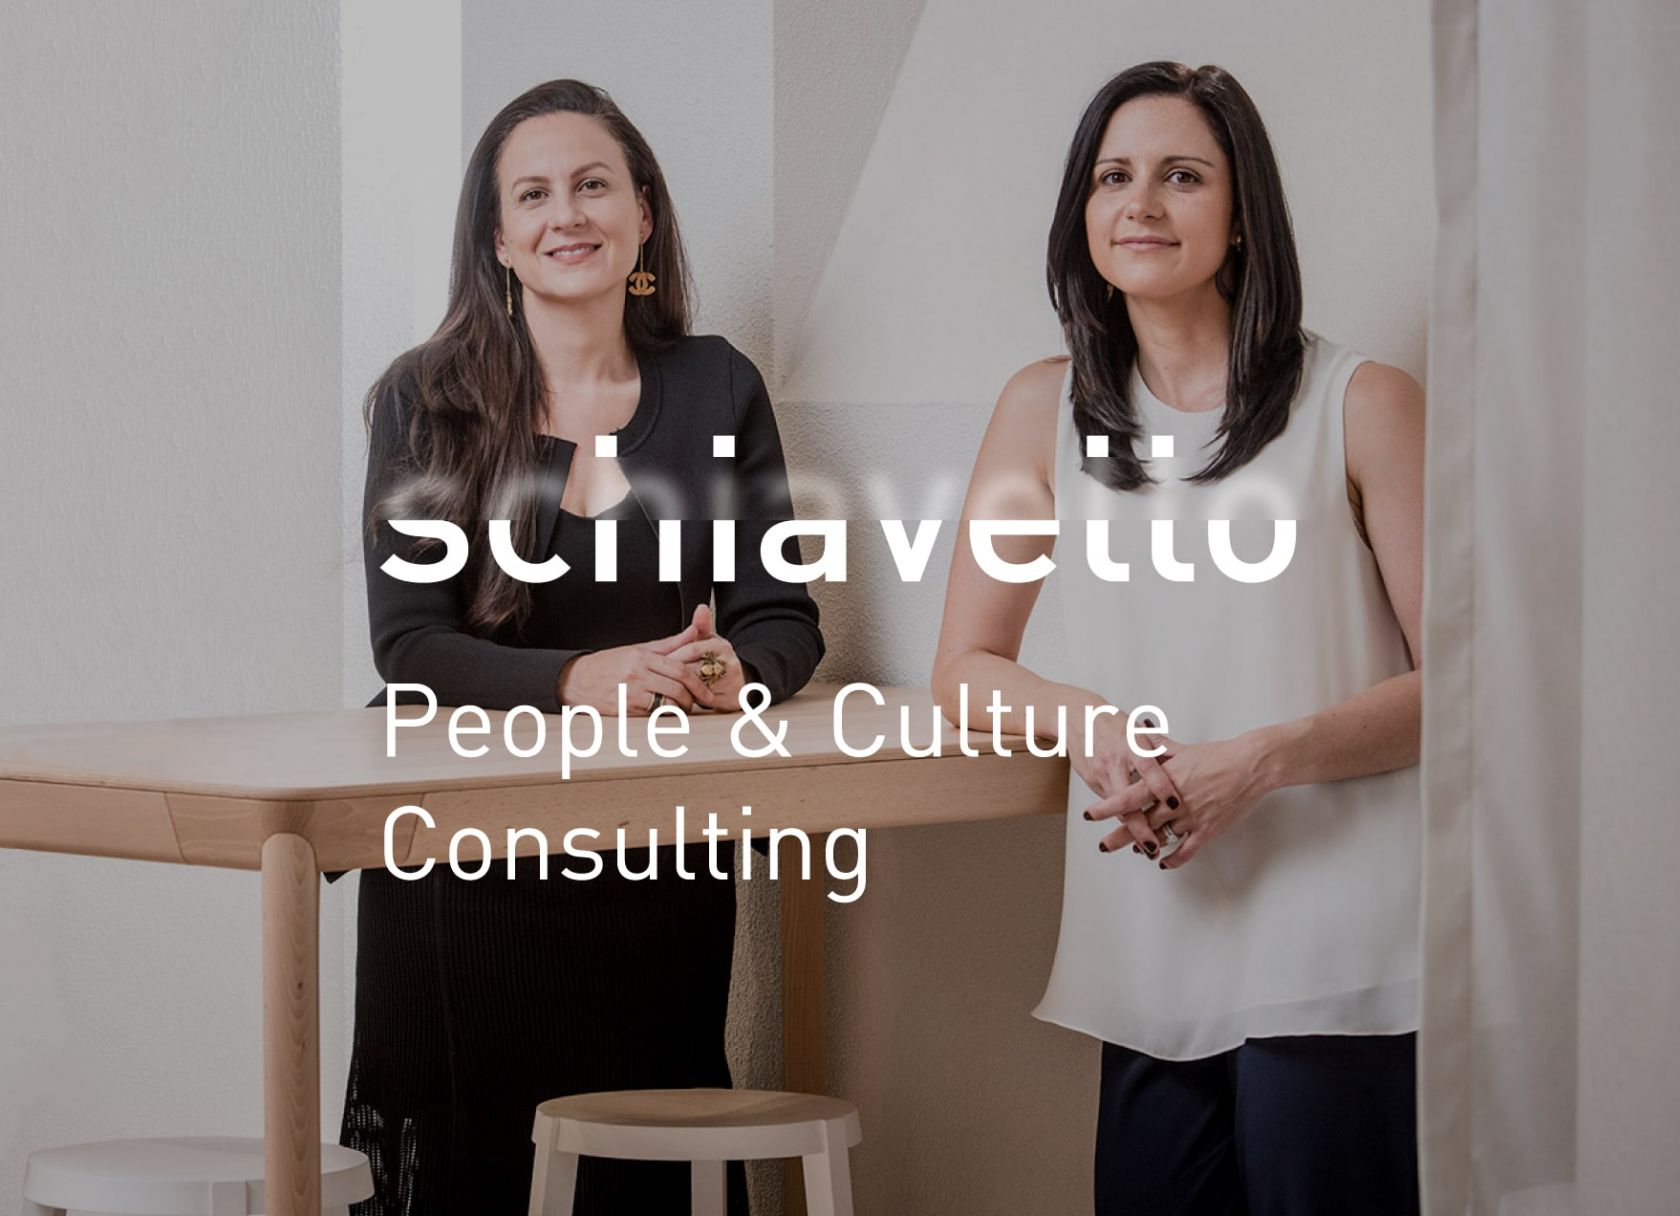 schiavello people and culture logo